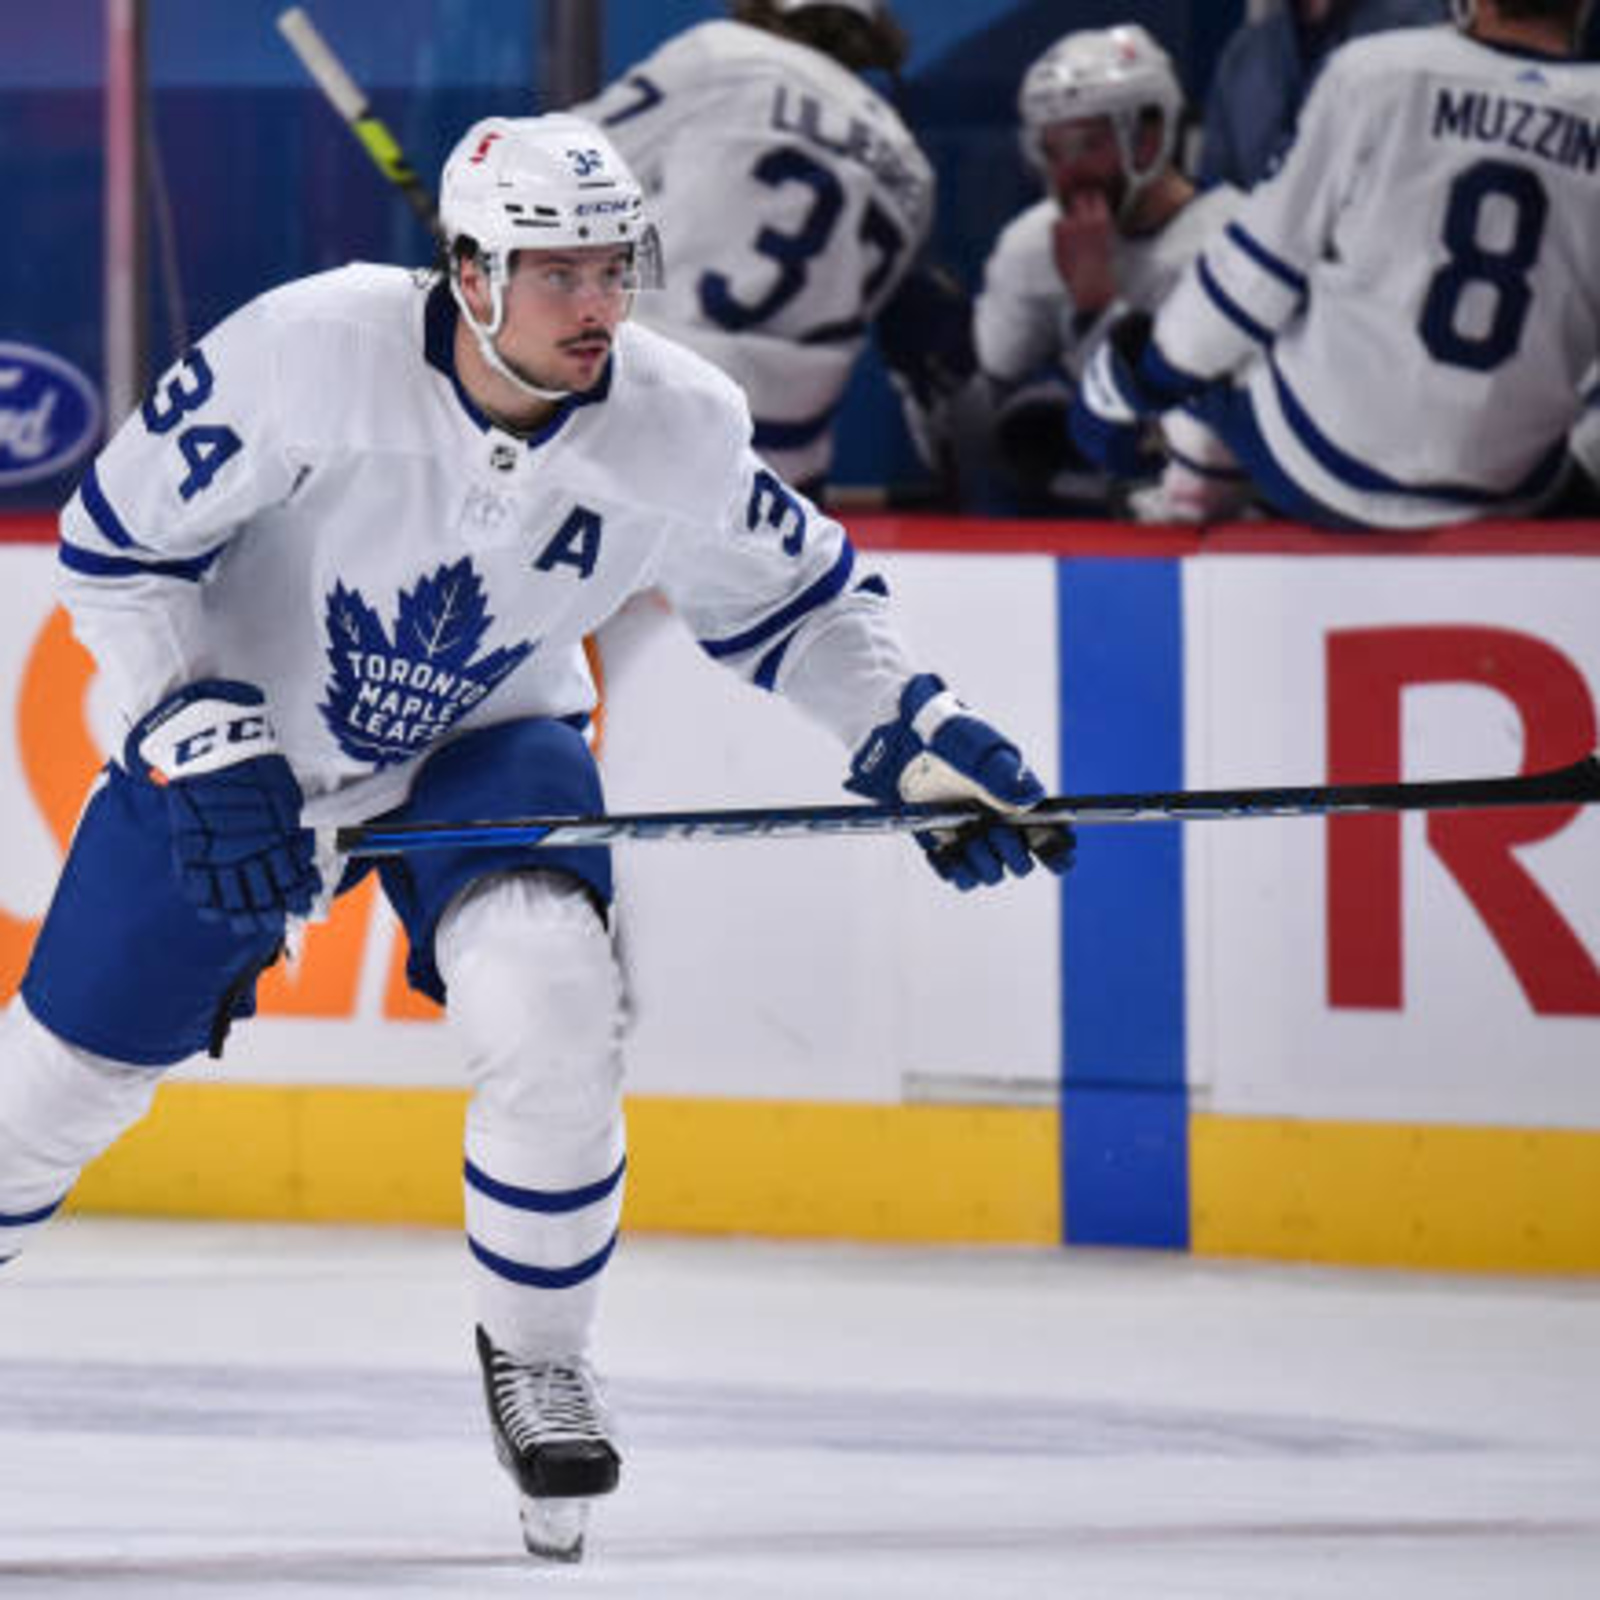 Leafs will reportedly wear their Bieber-inspired jersey Saturday